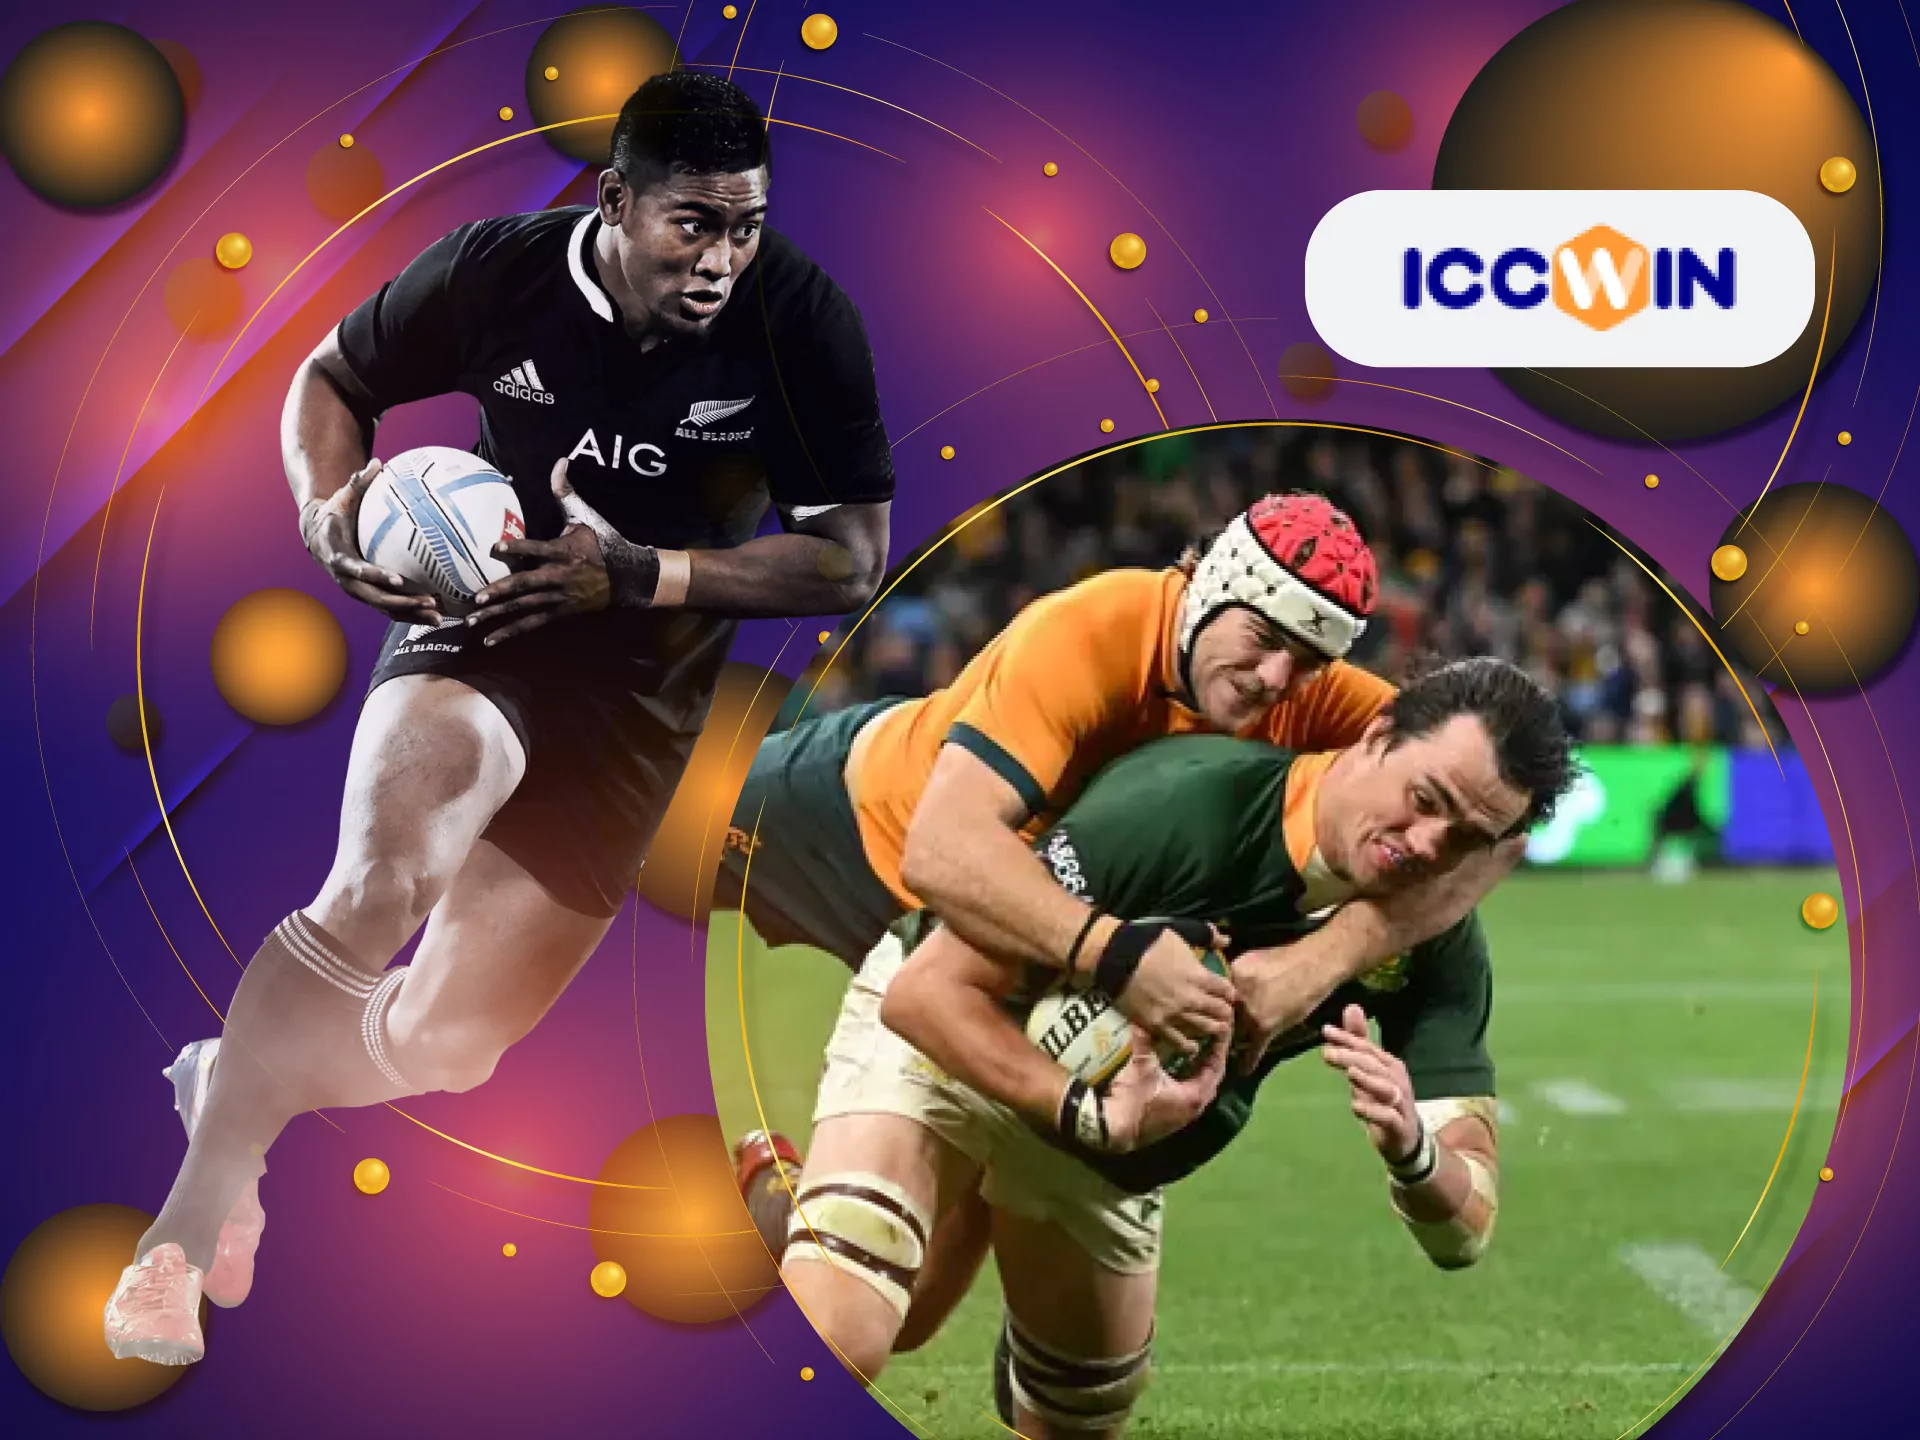 Place bets on the rugby matches in the ICCWIN sportsbook.